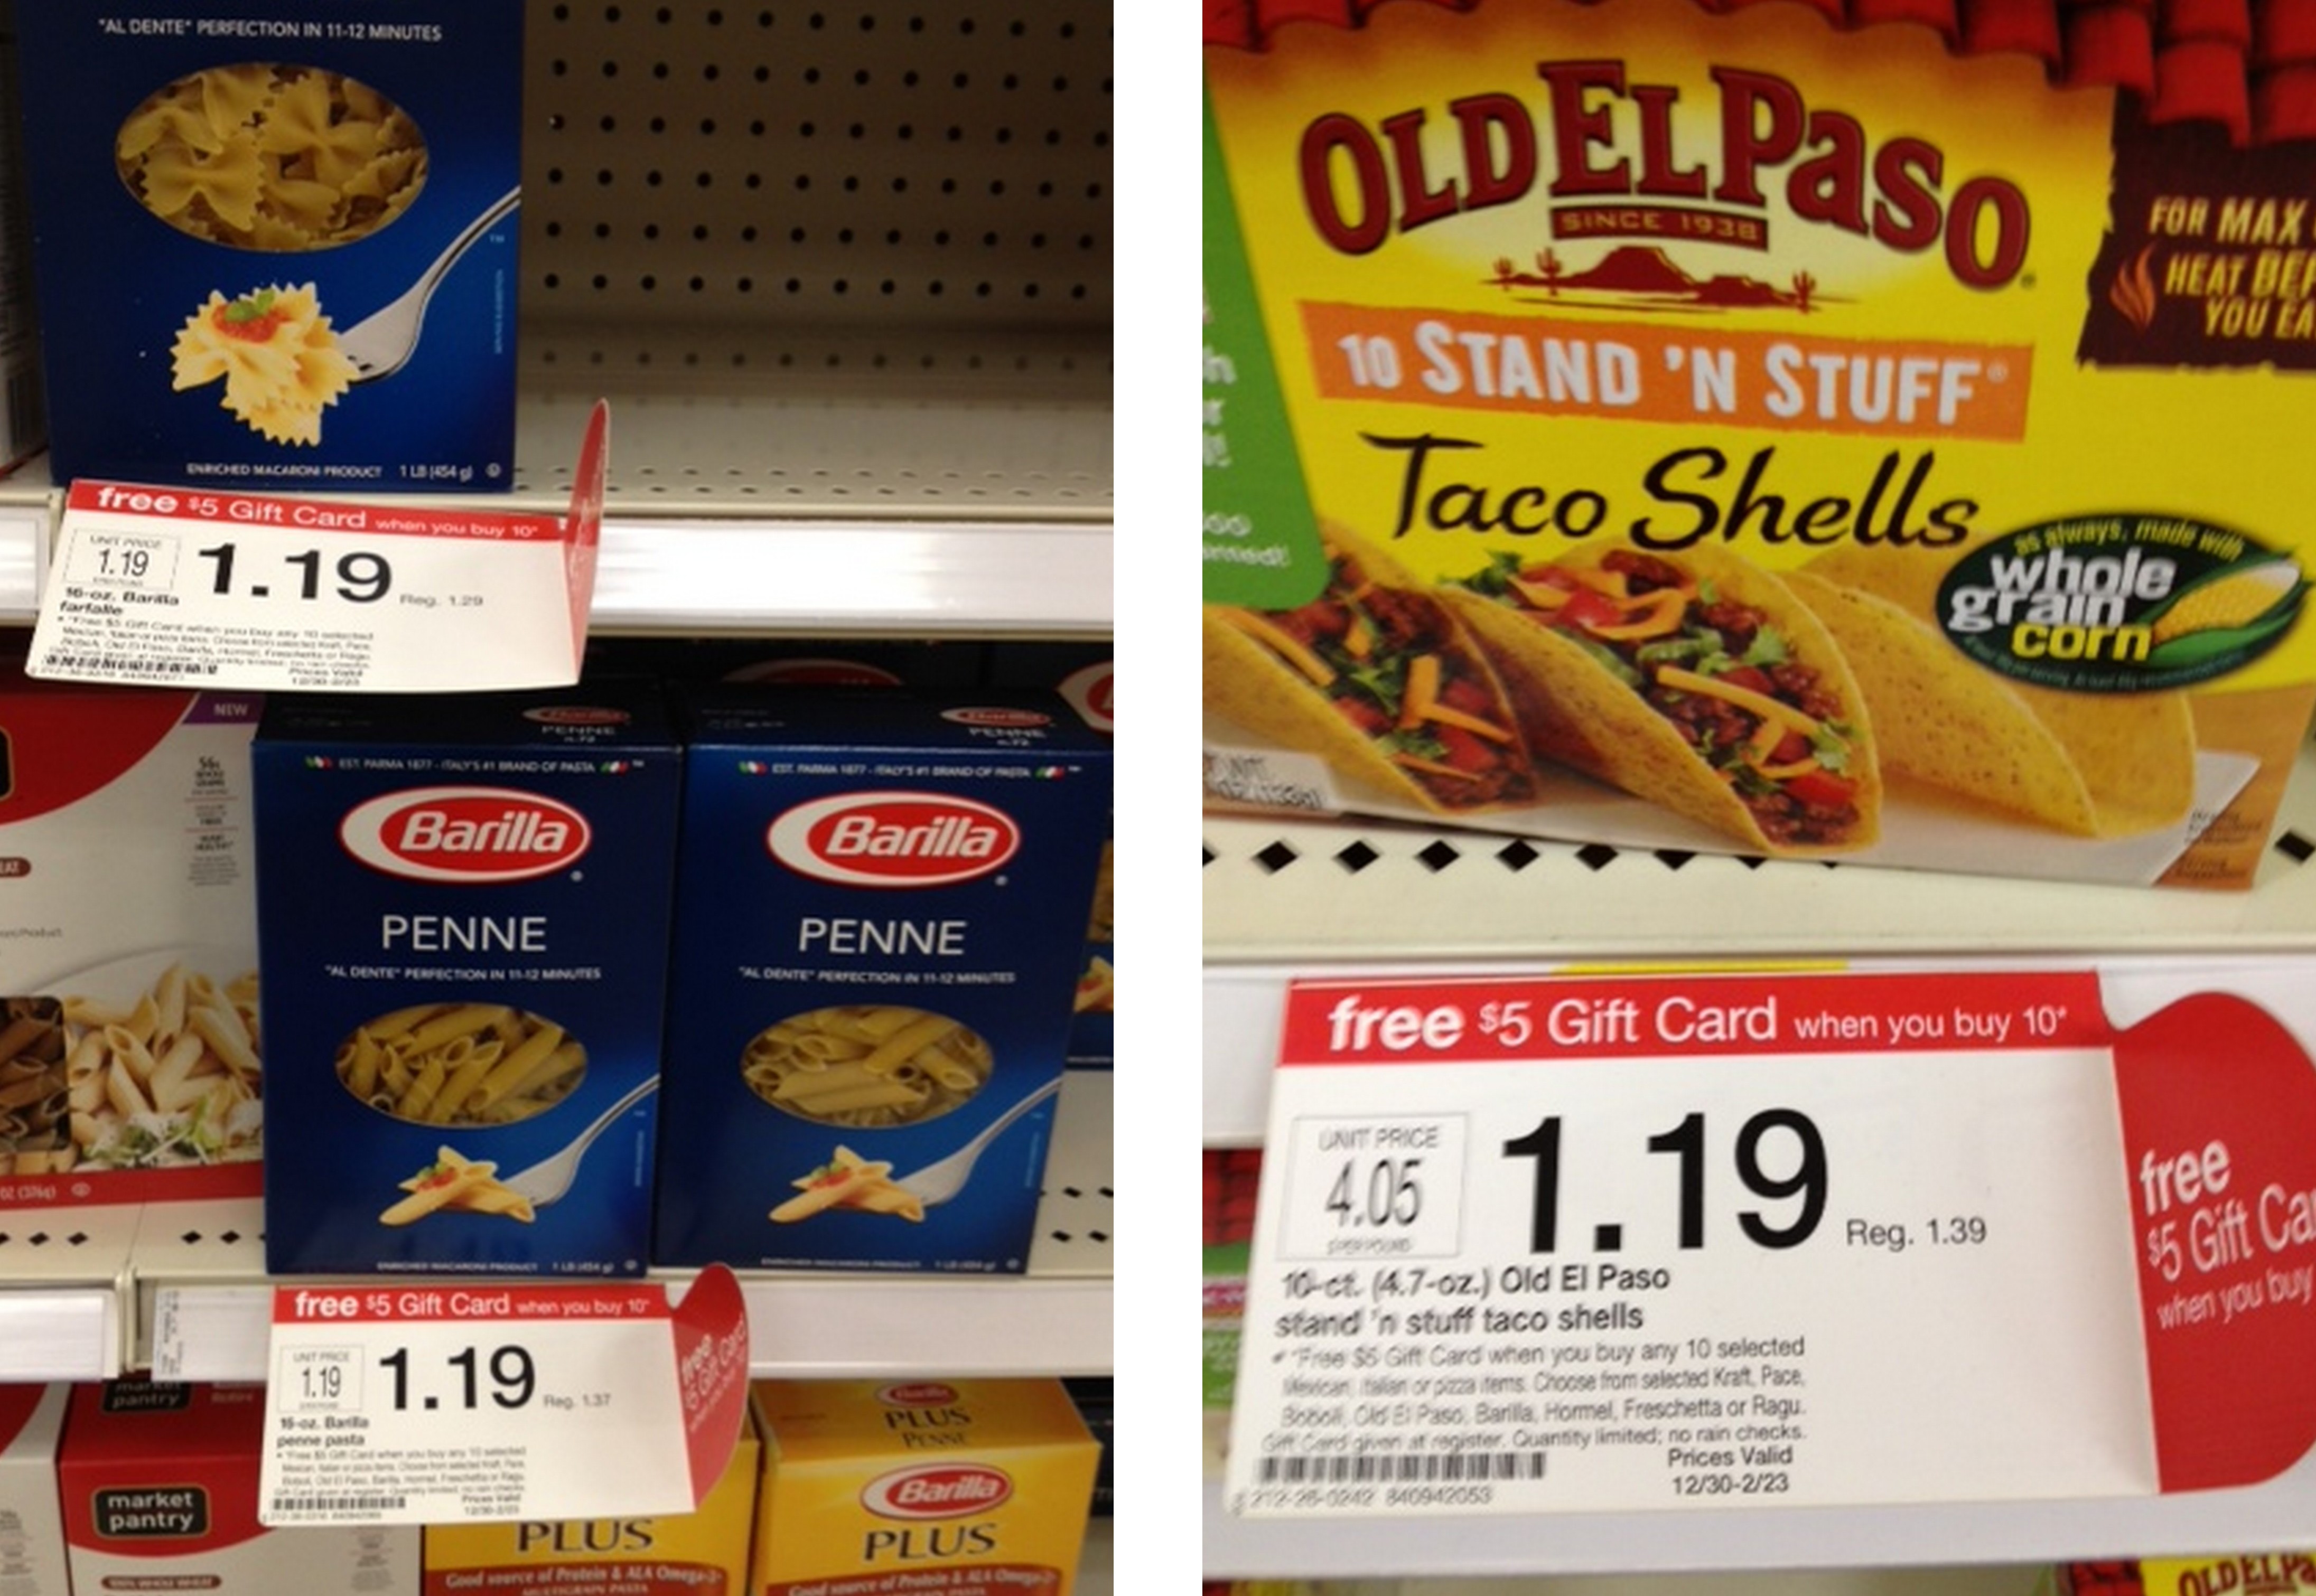 Target Unadvertised Gift Card Deal | More Scenarios With New Insert Coupons